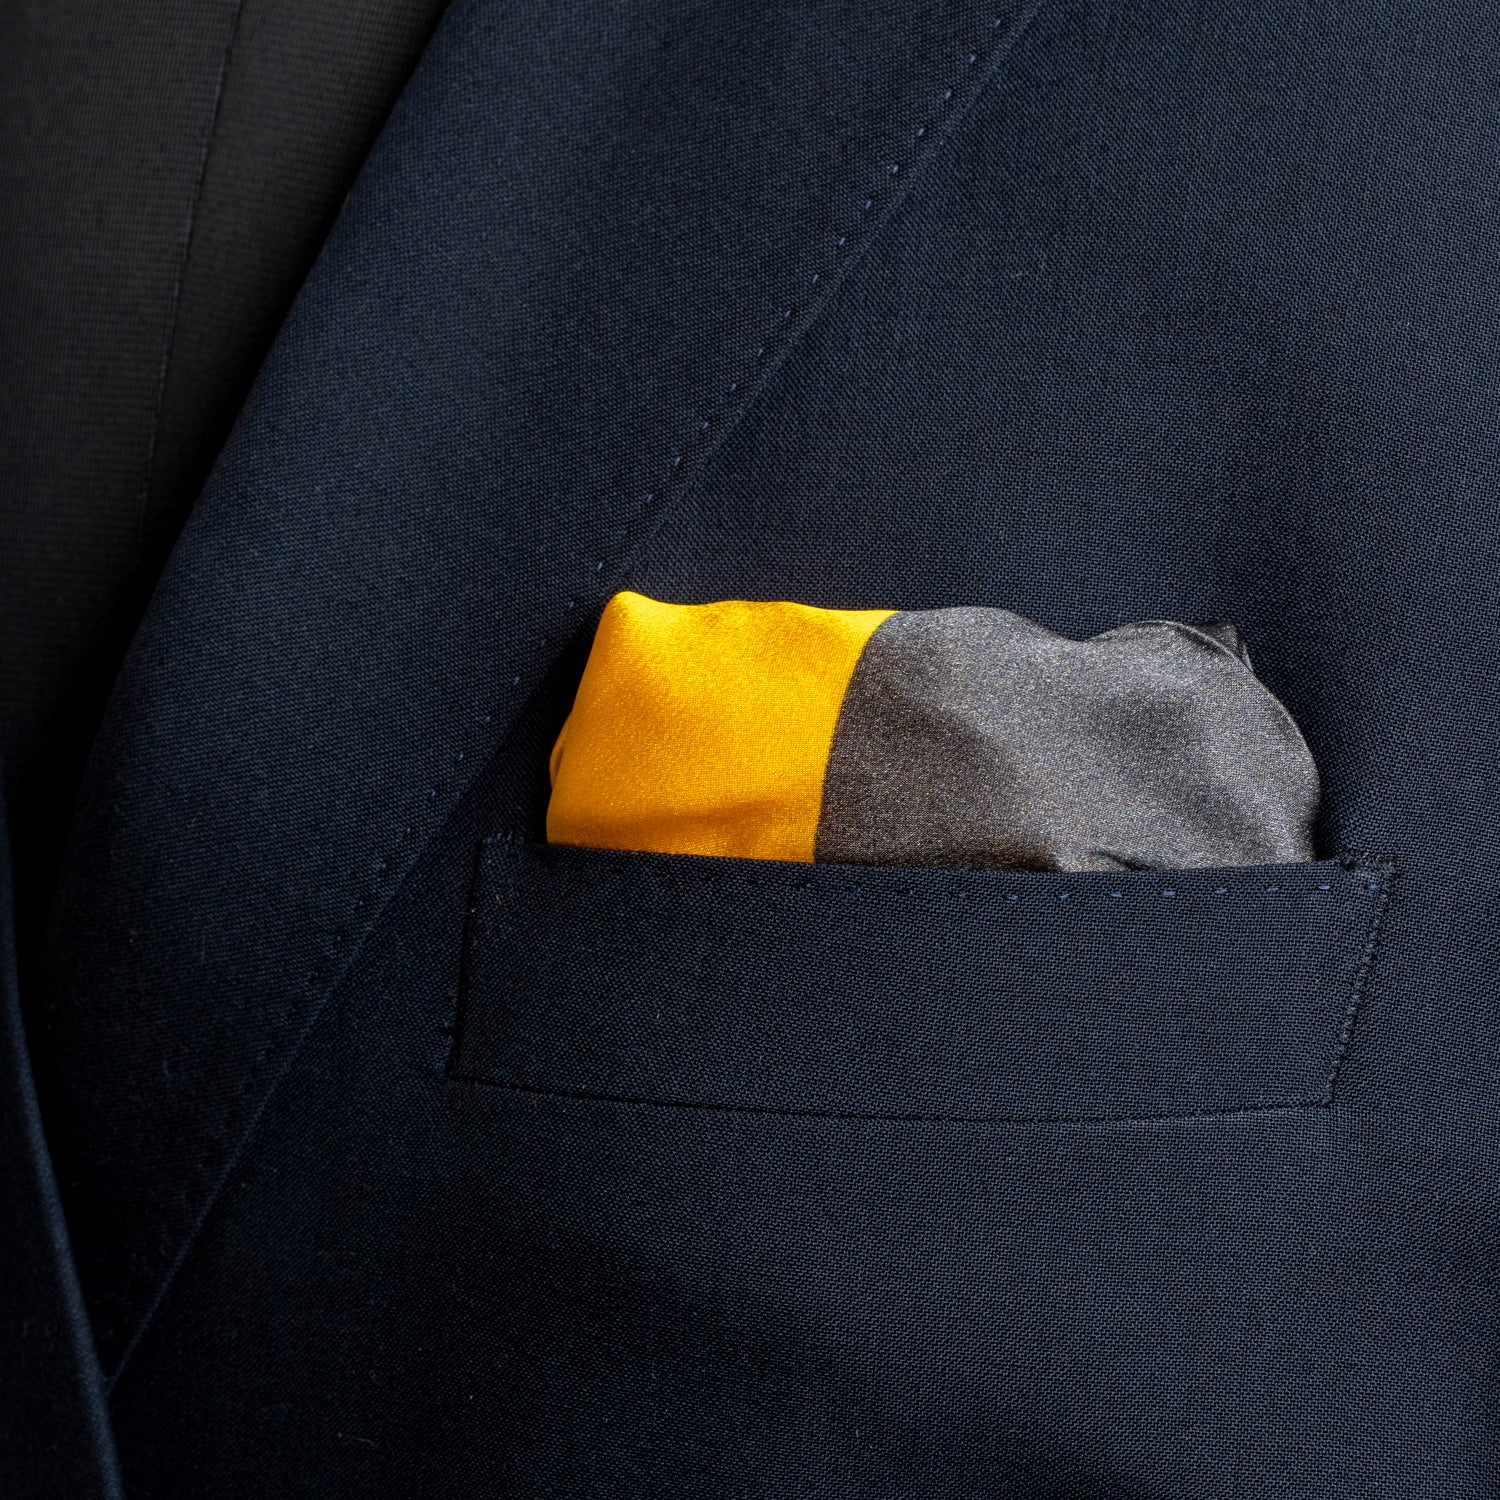 Chokore Yellow Satin Silk pocket square from the Plaids Line